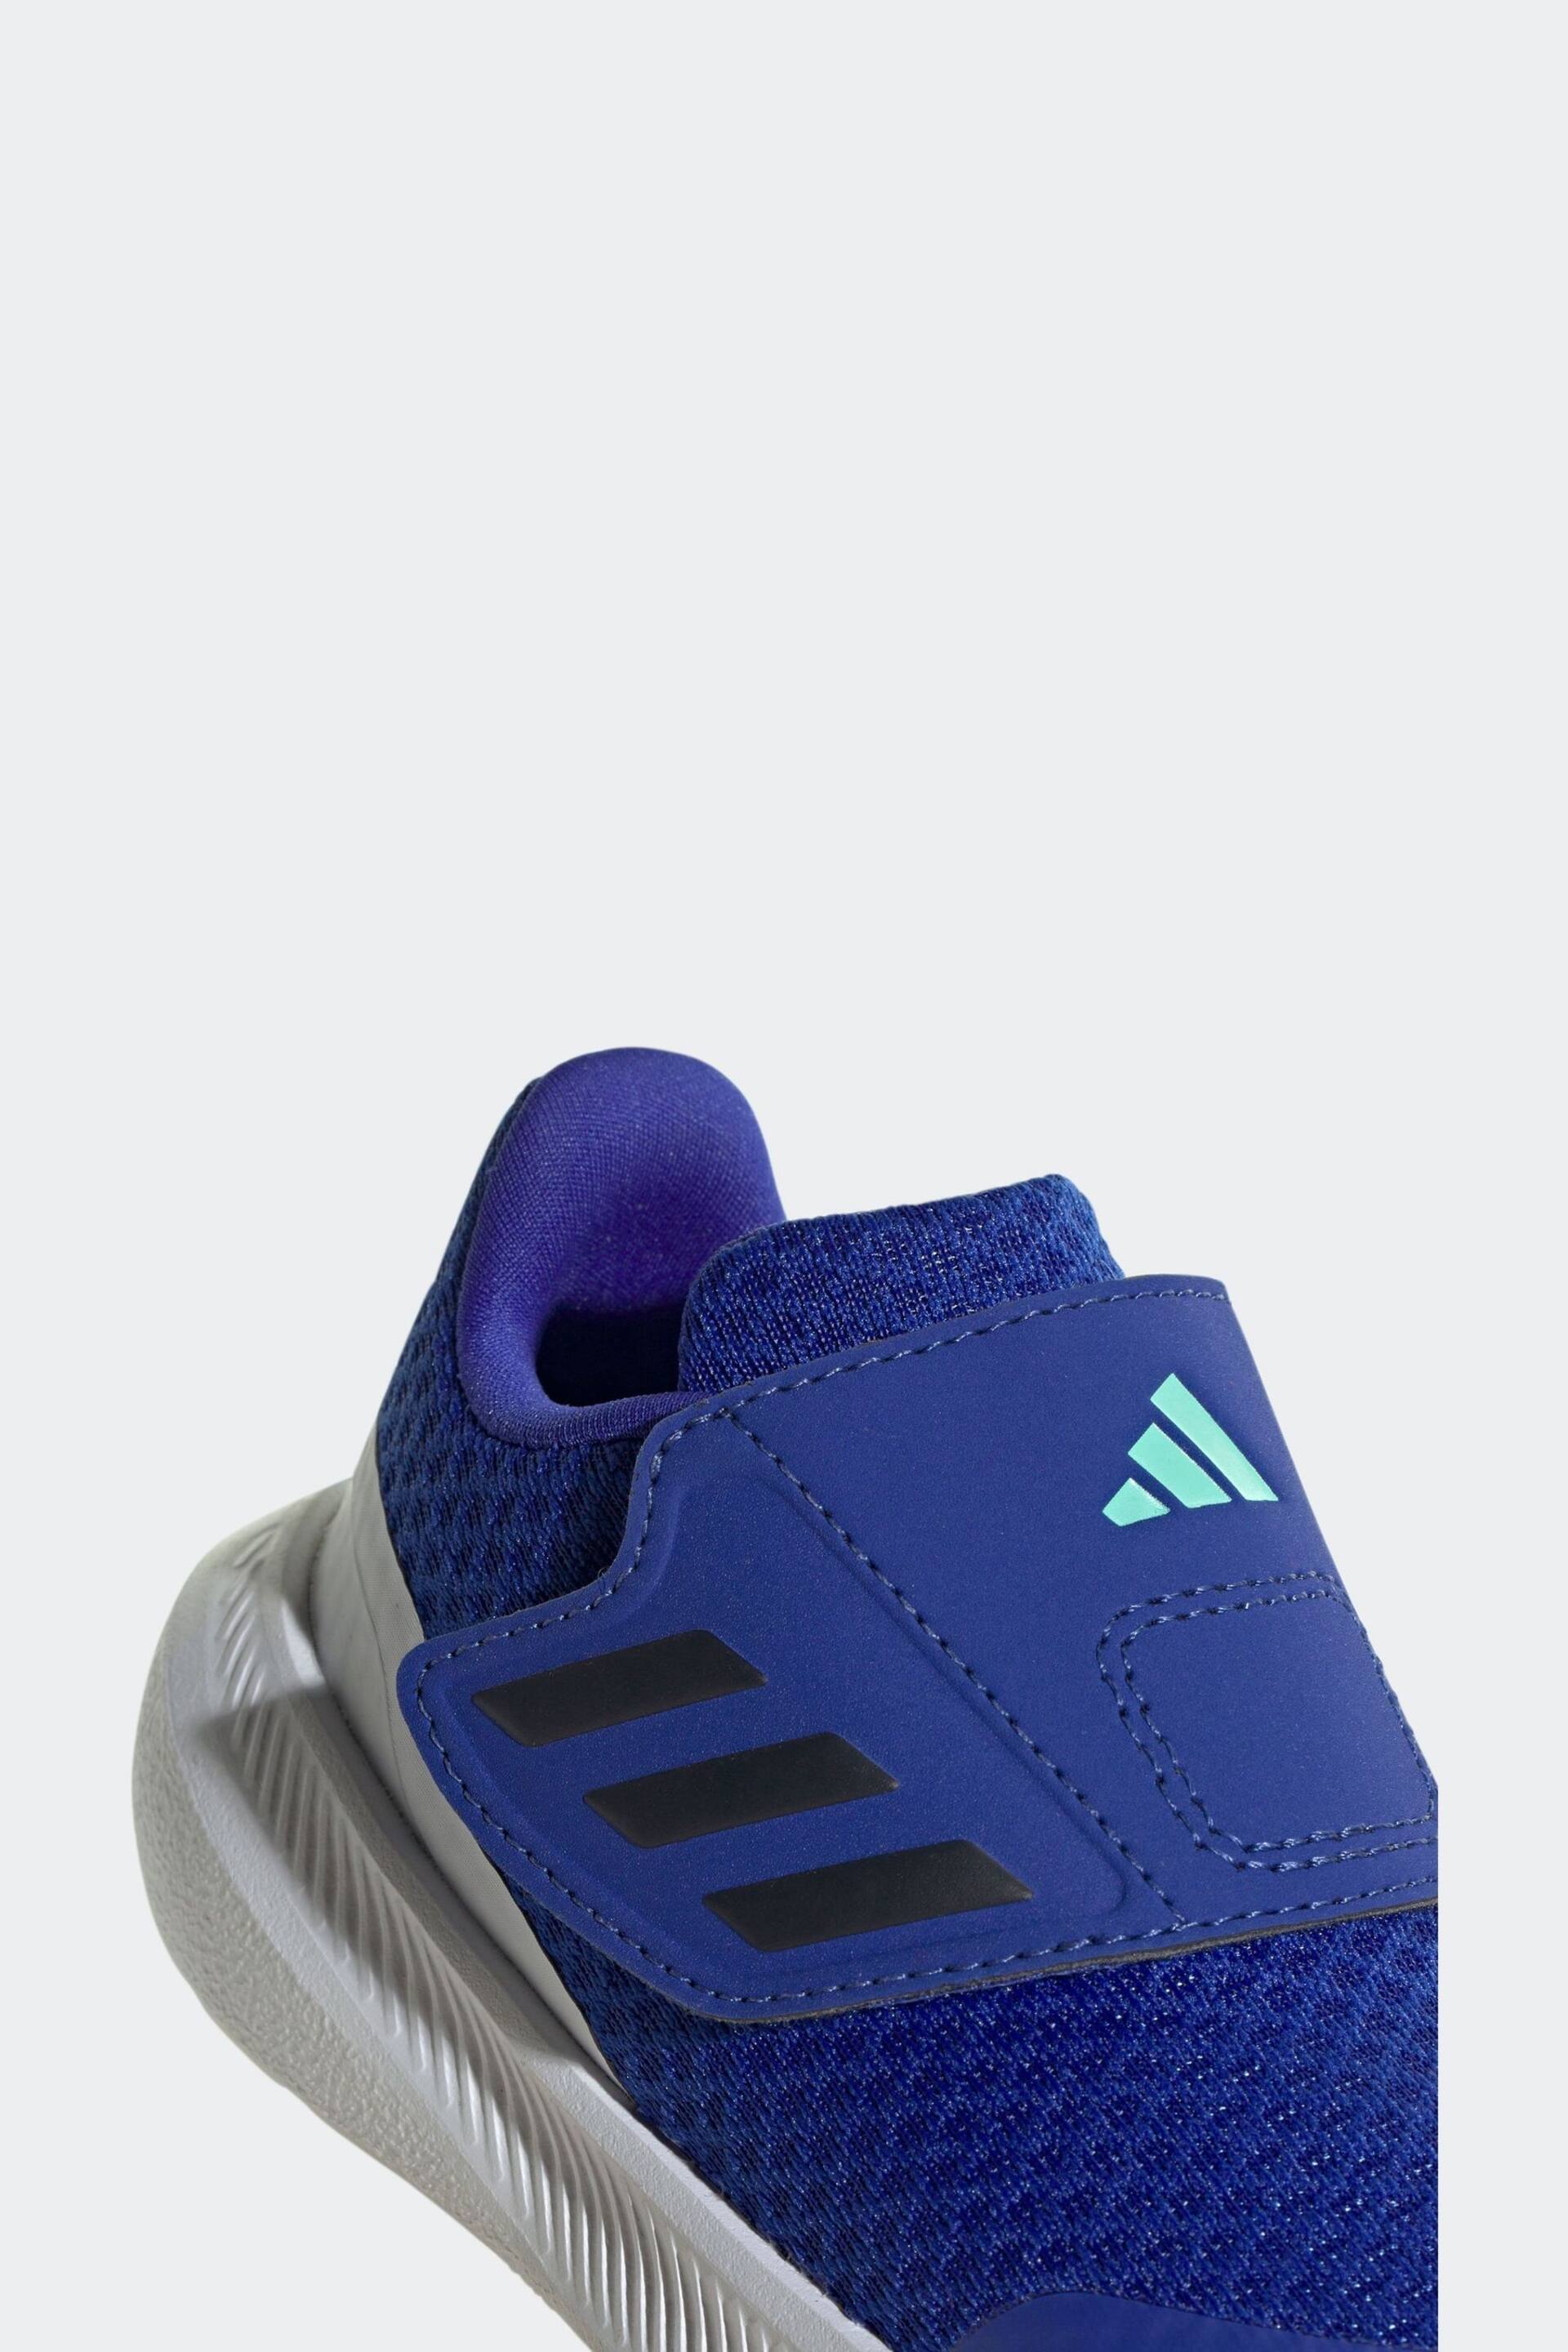 adidas Blue Sportswear Runfalcon 3.0 Hook And Loop Trainers - Image 9 of 9